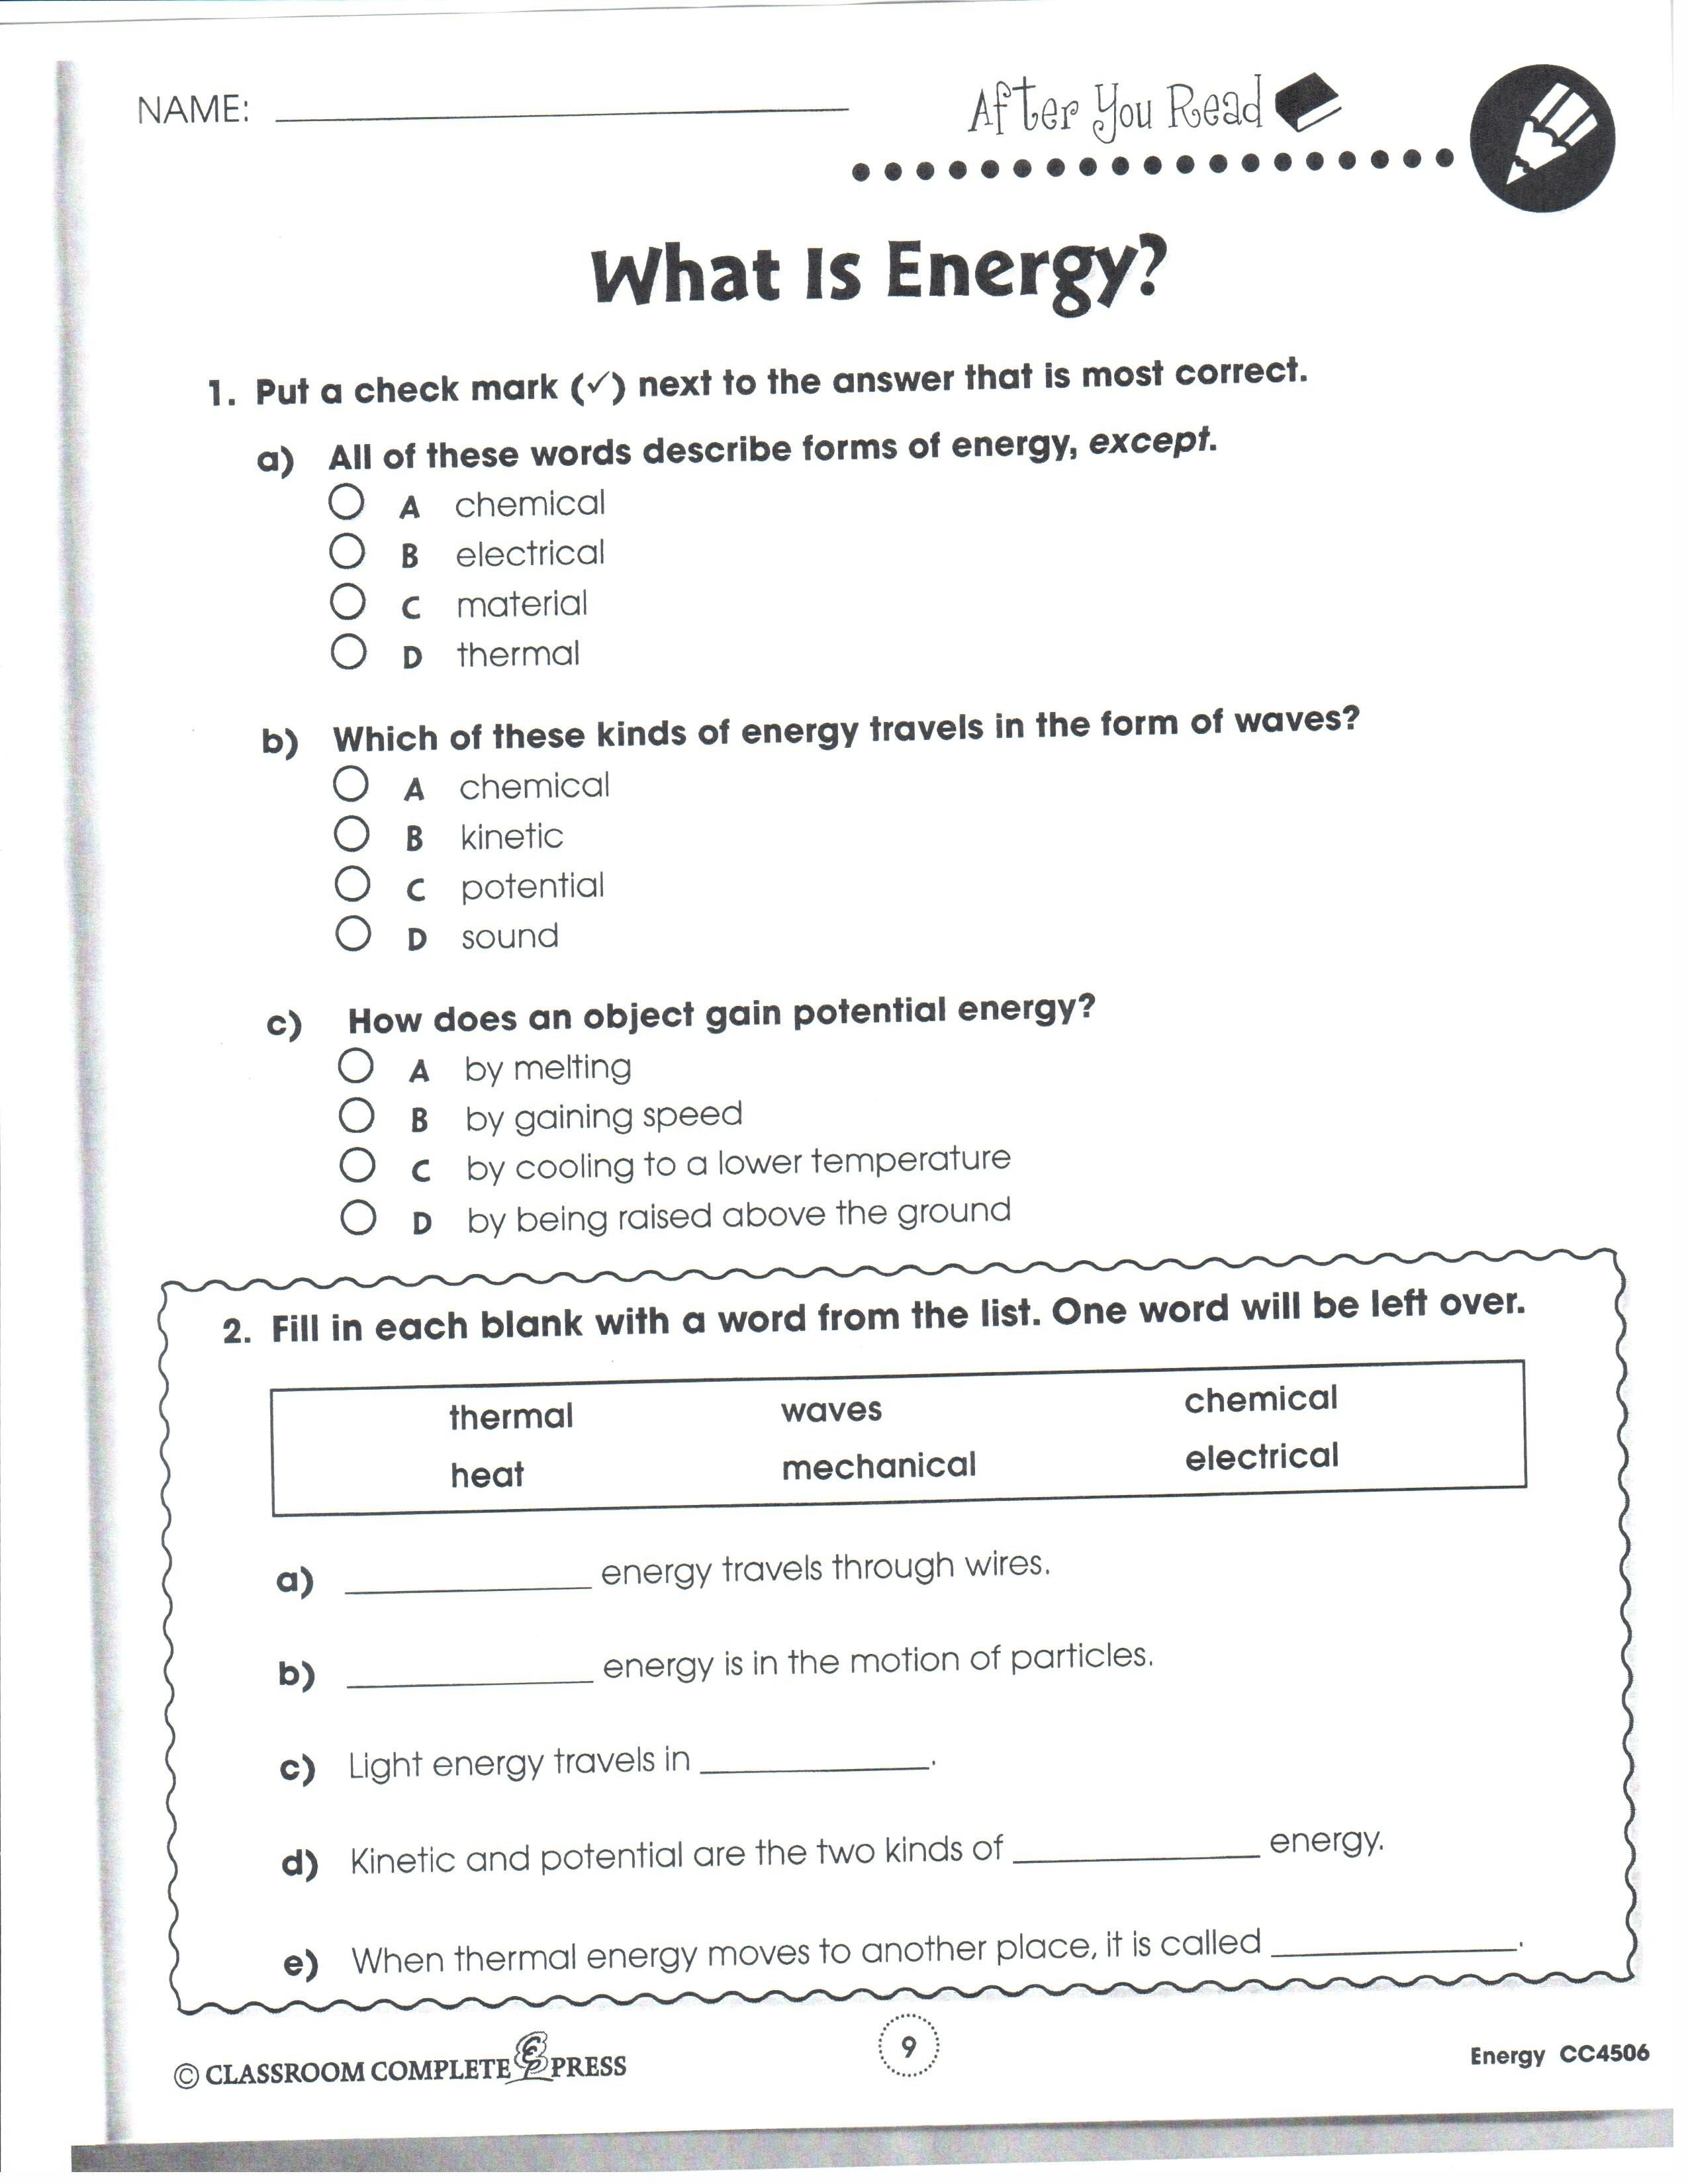 Worksheet Learning Spanish Worksheets Highlights Hidden Pictures Along With Reading Comprehension High School Worksheets Pdf